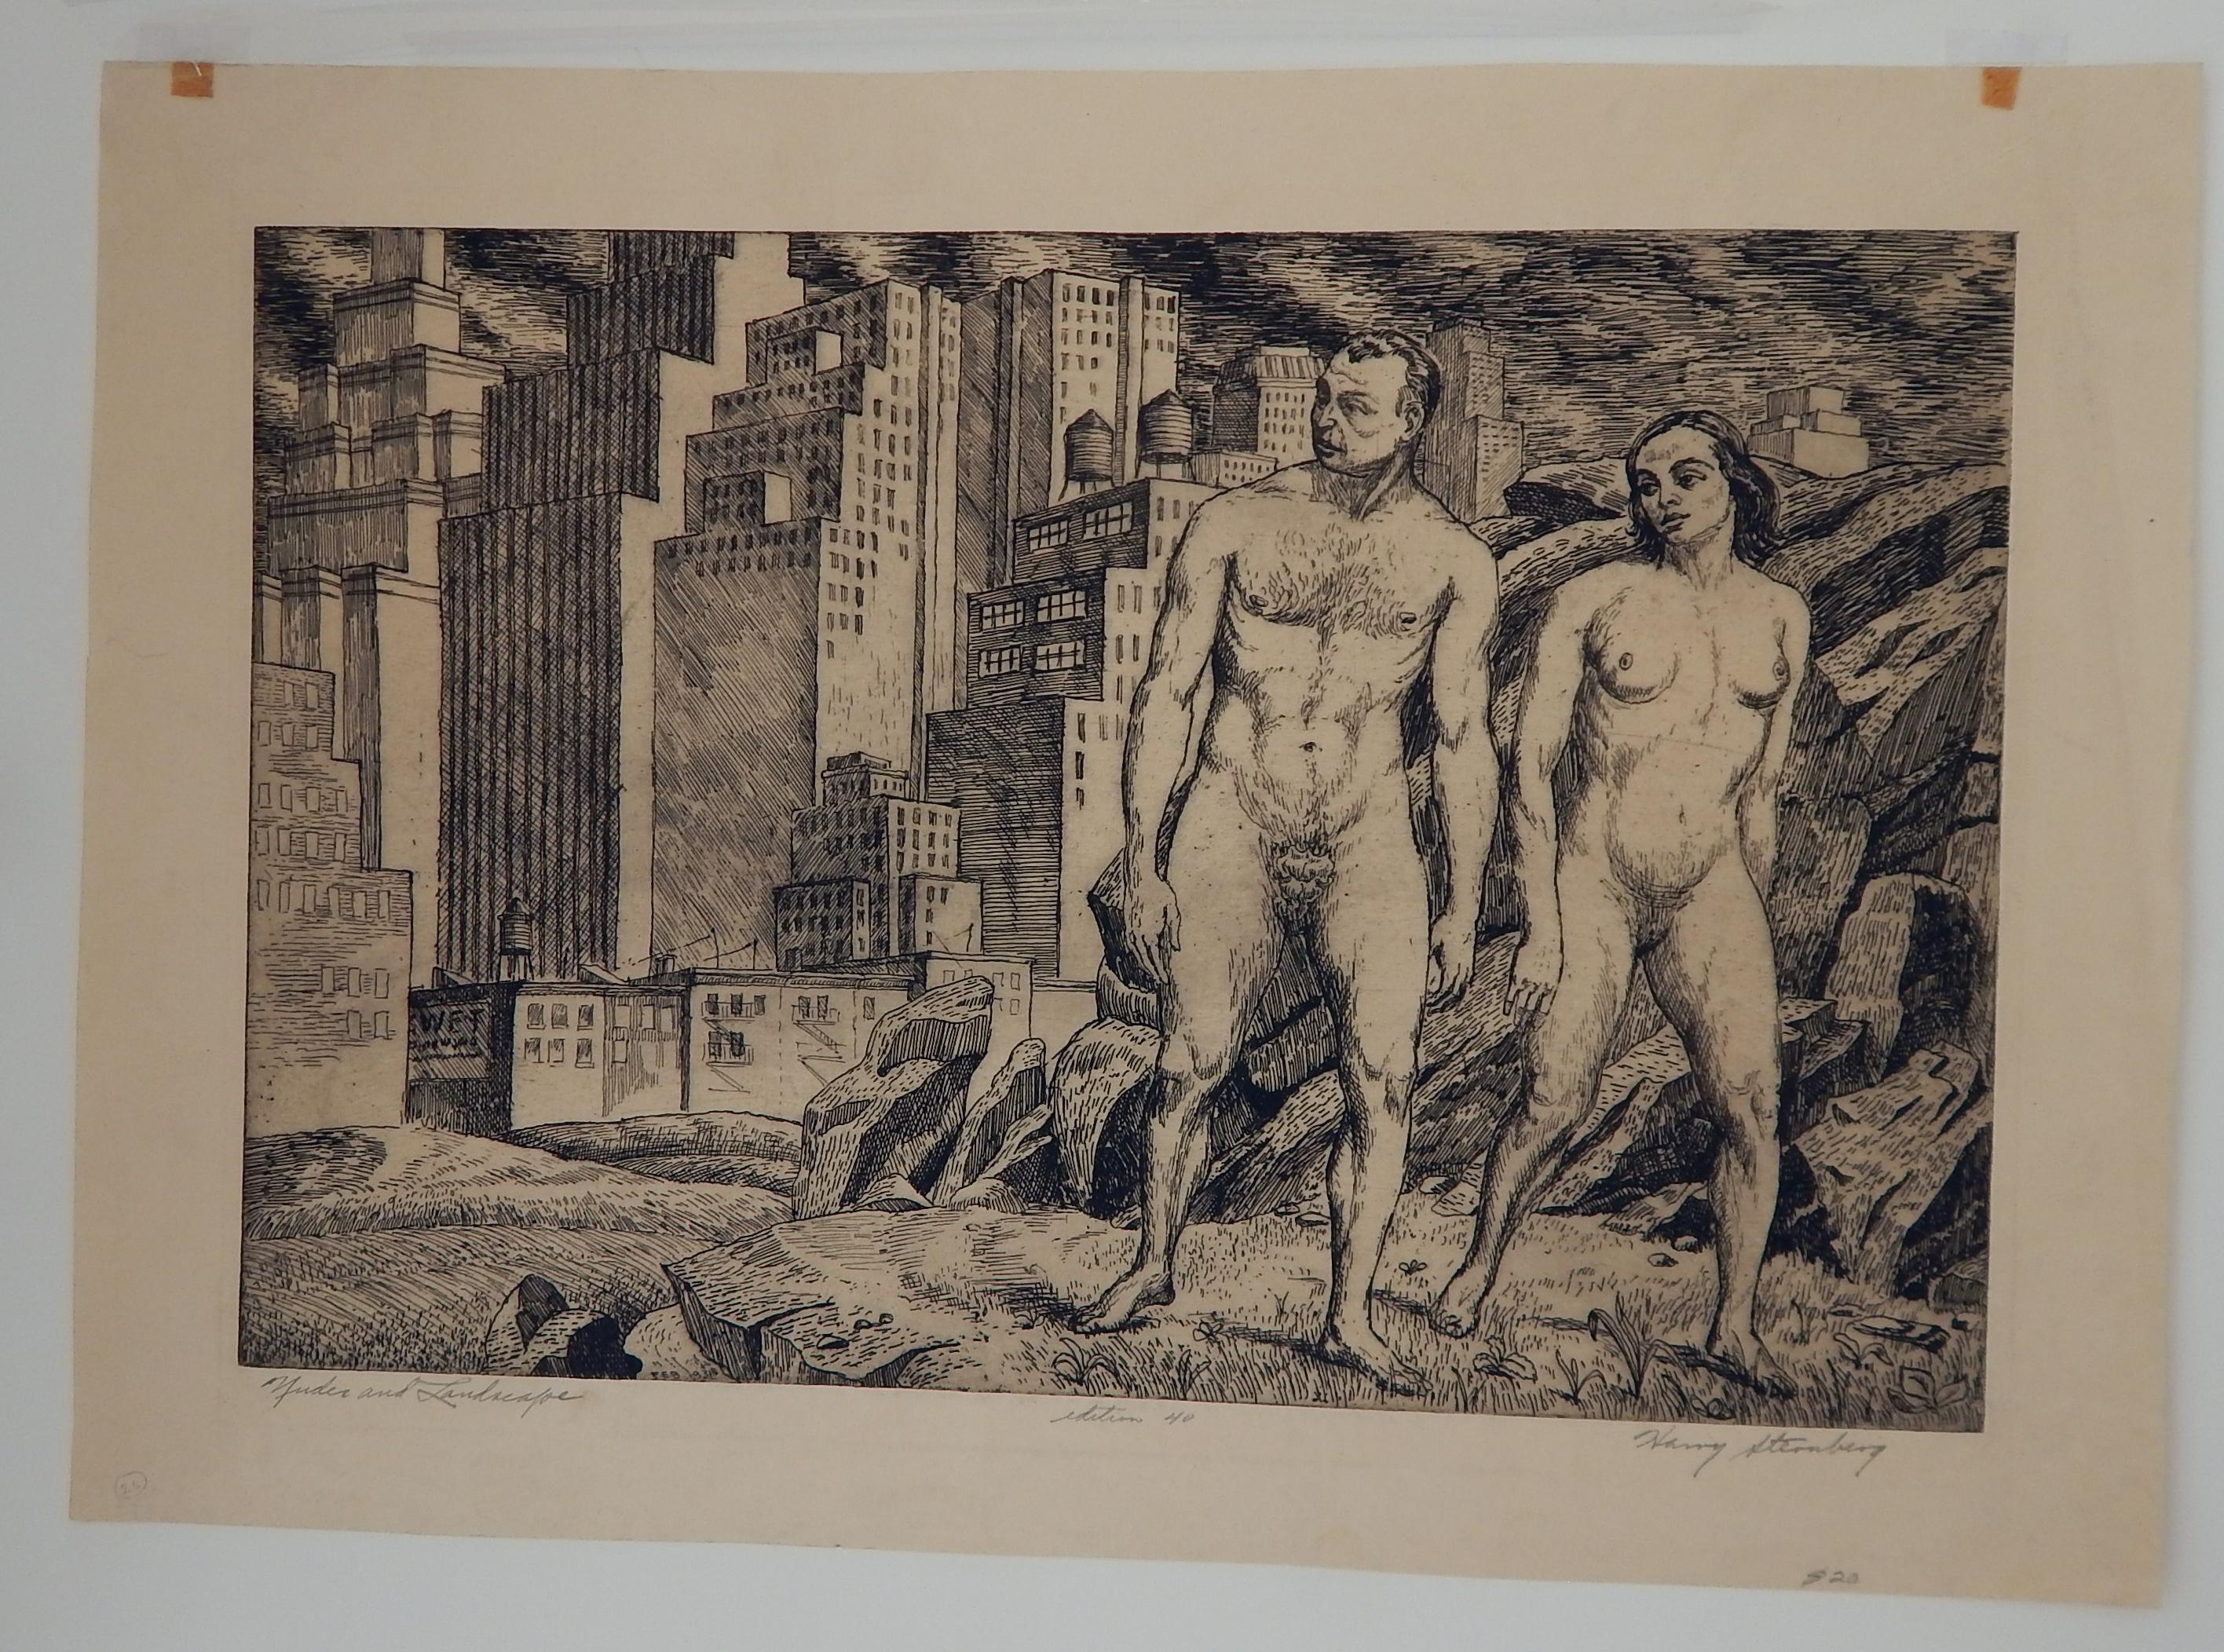 New York and California Artist, Harry Sternberg (1904-2001) Ooriginal etching.
Pencil Signed lower right. The edition size is small, only 40, seen lower center on the print.
It is unframed, in excellent condition and presents in an 16